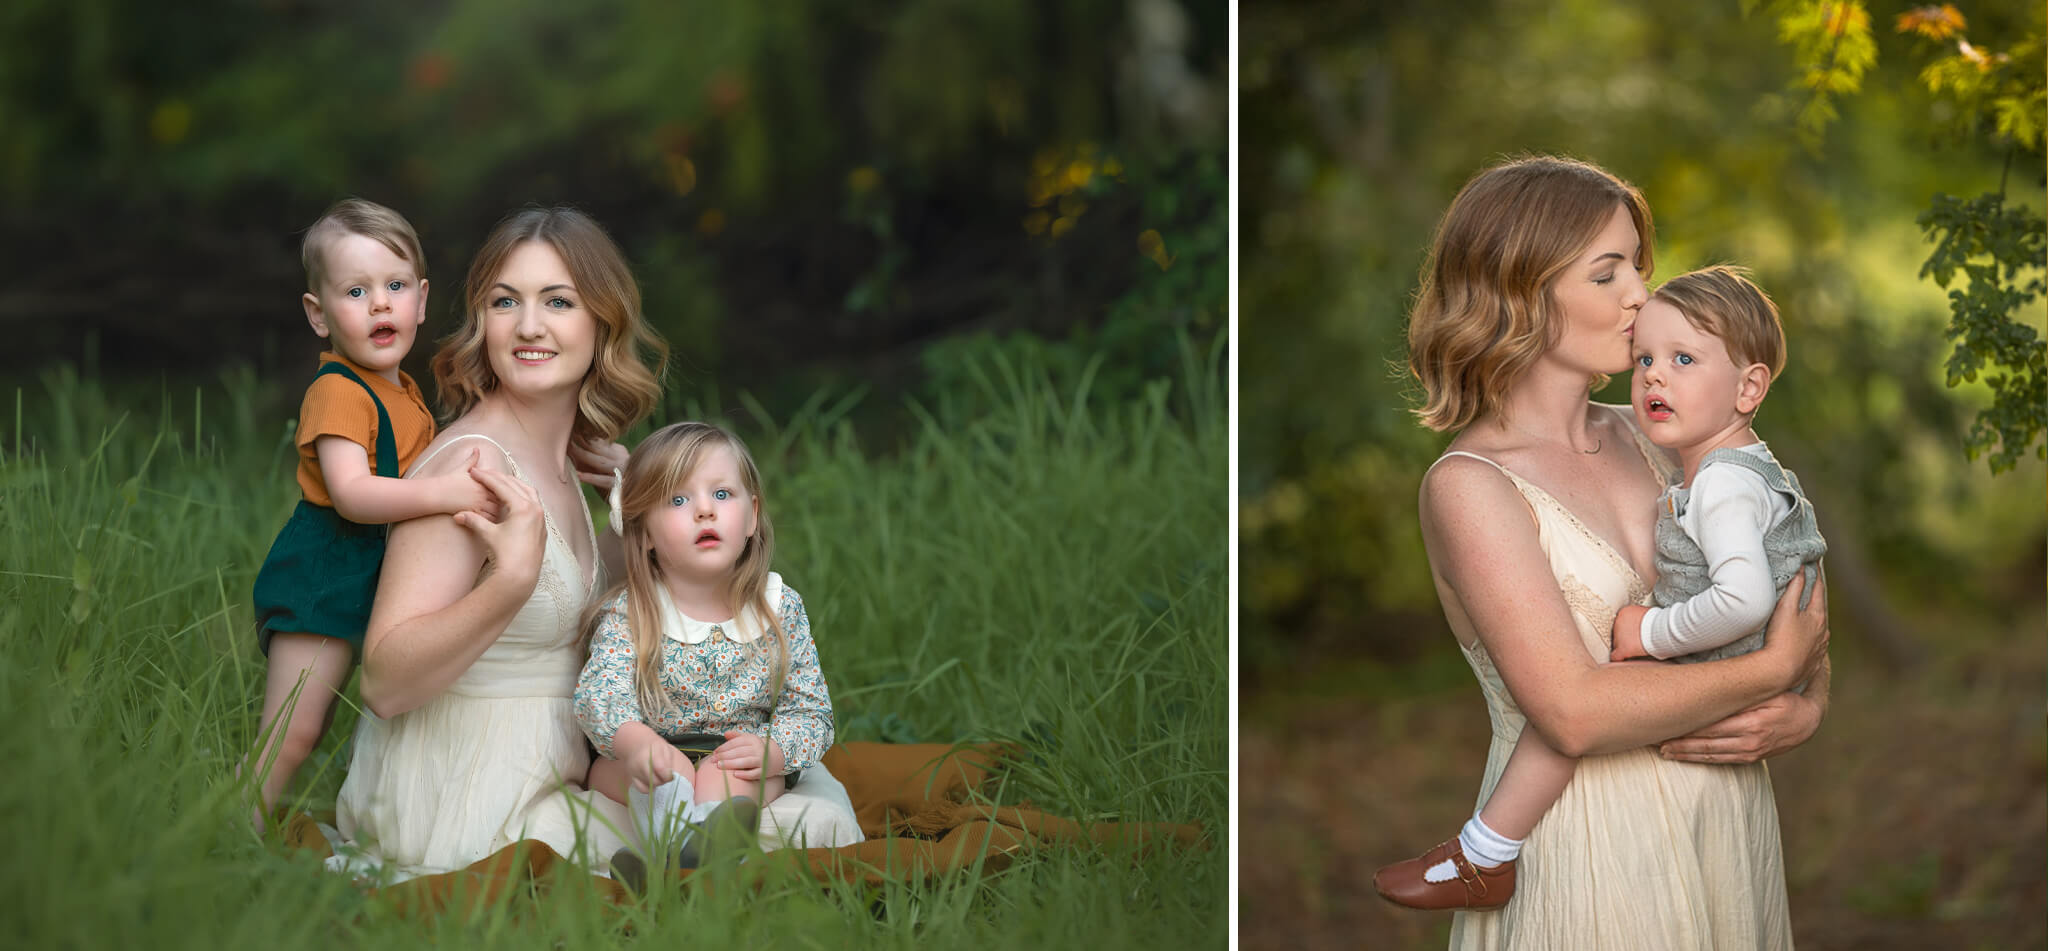 Perth mum with her toddlers in a lush green outdoor location during family photoshoot